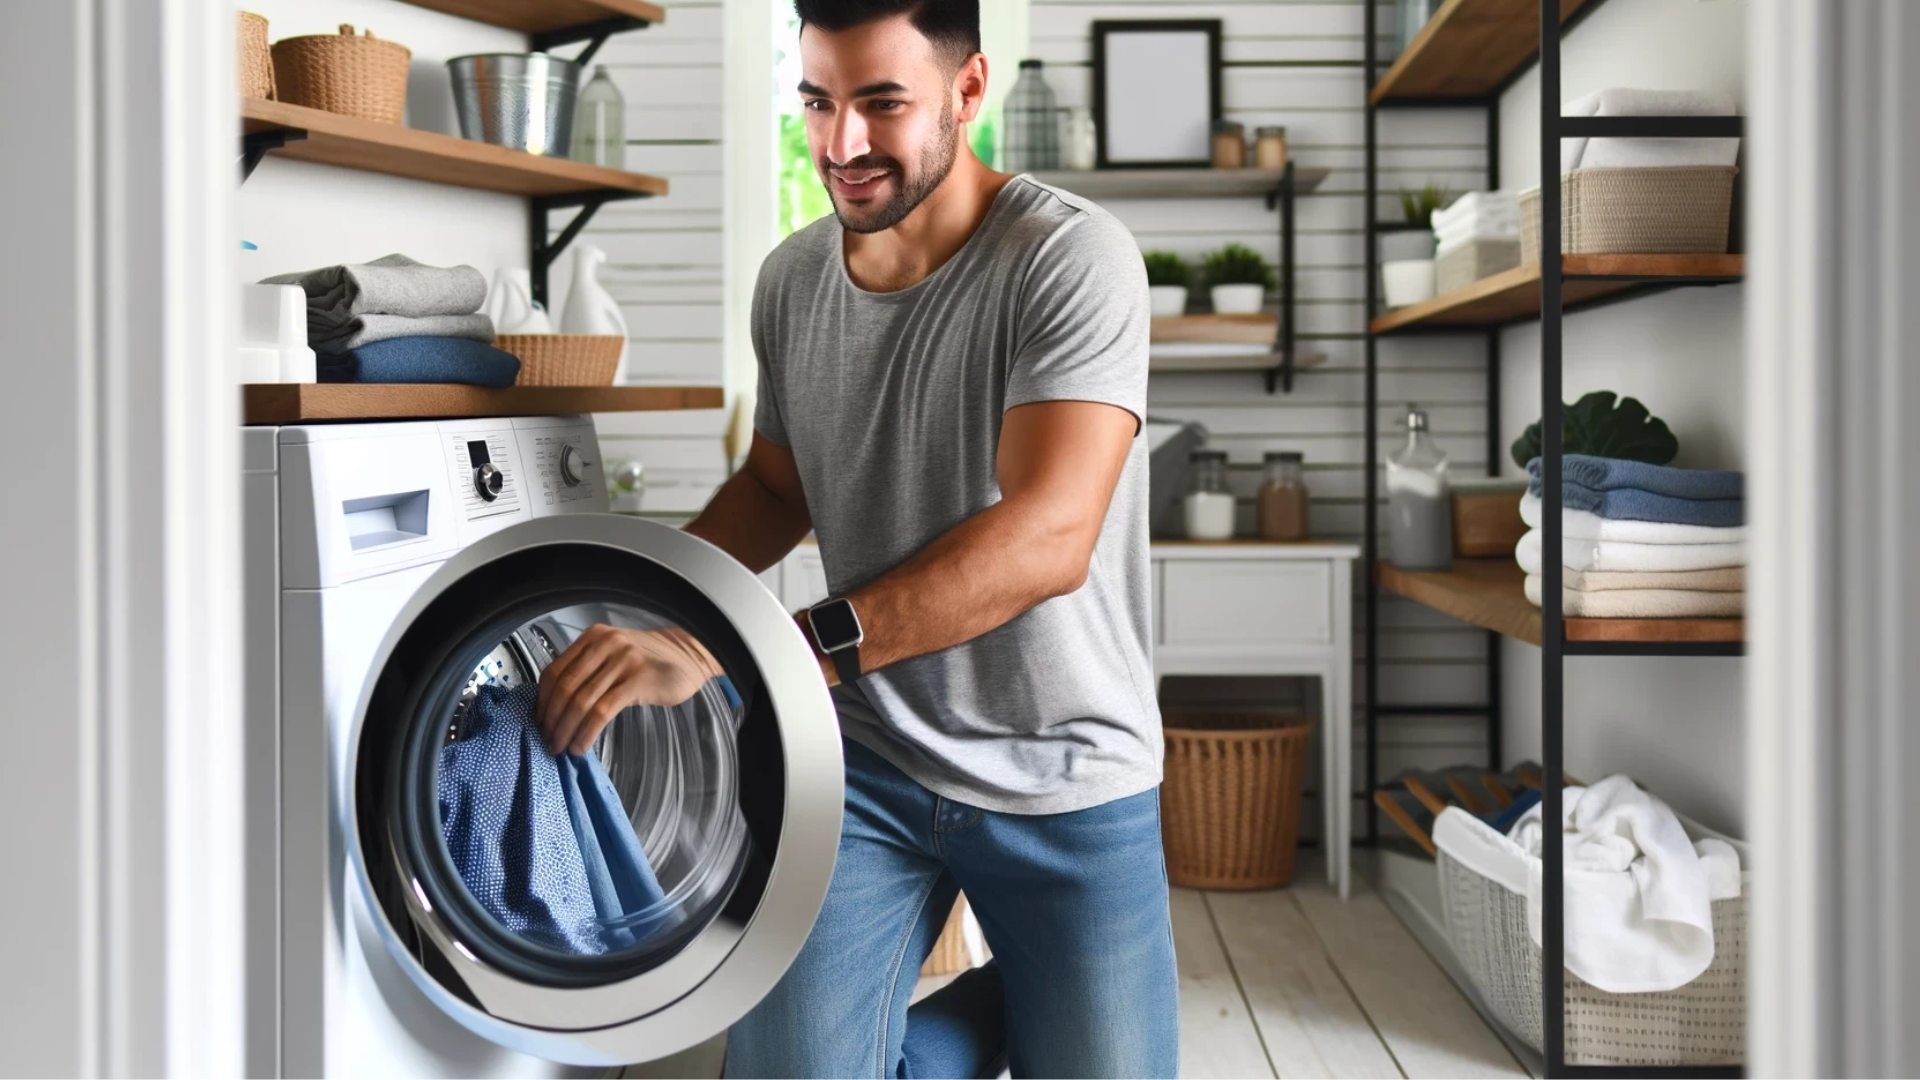 Laundry day just got a little brighter: Enjoying simple chores with a smile.